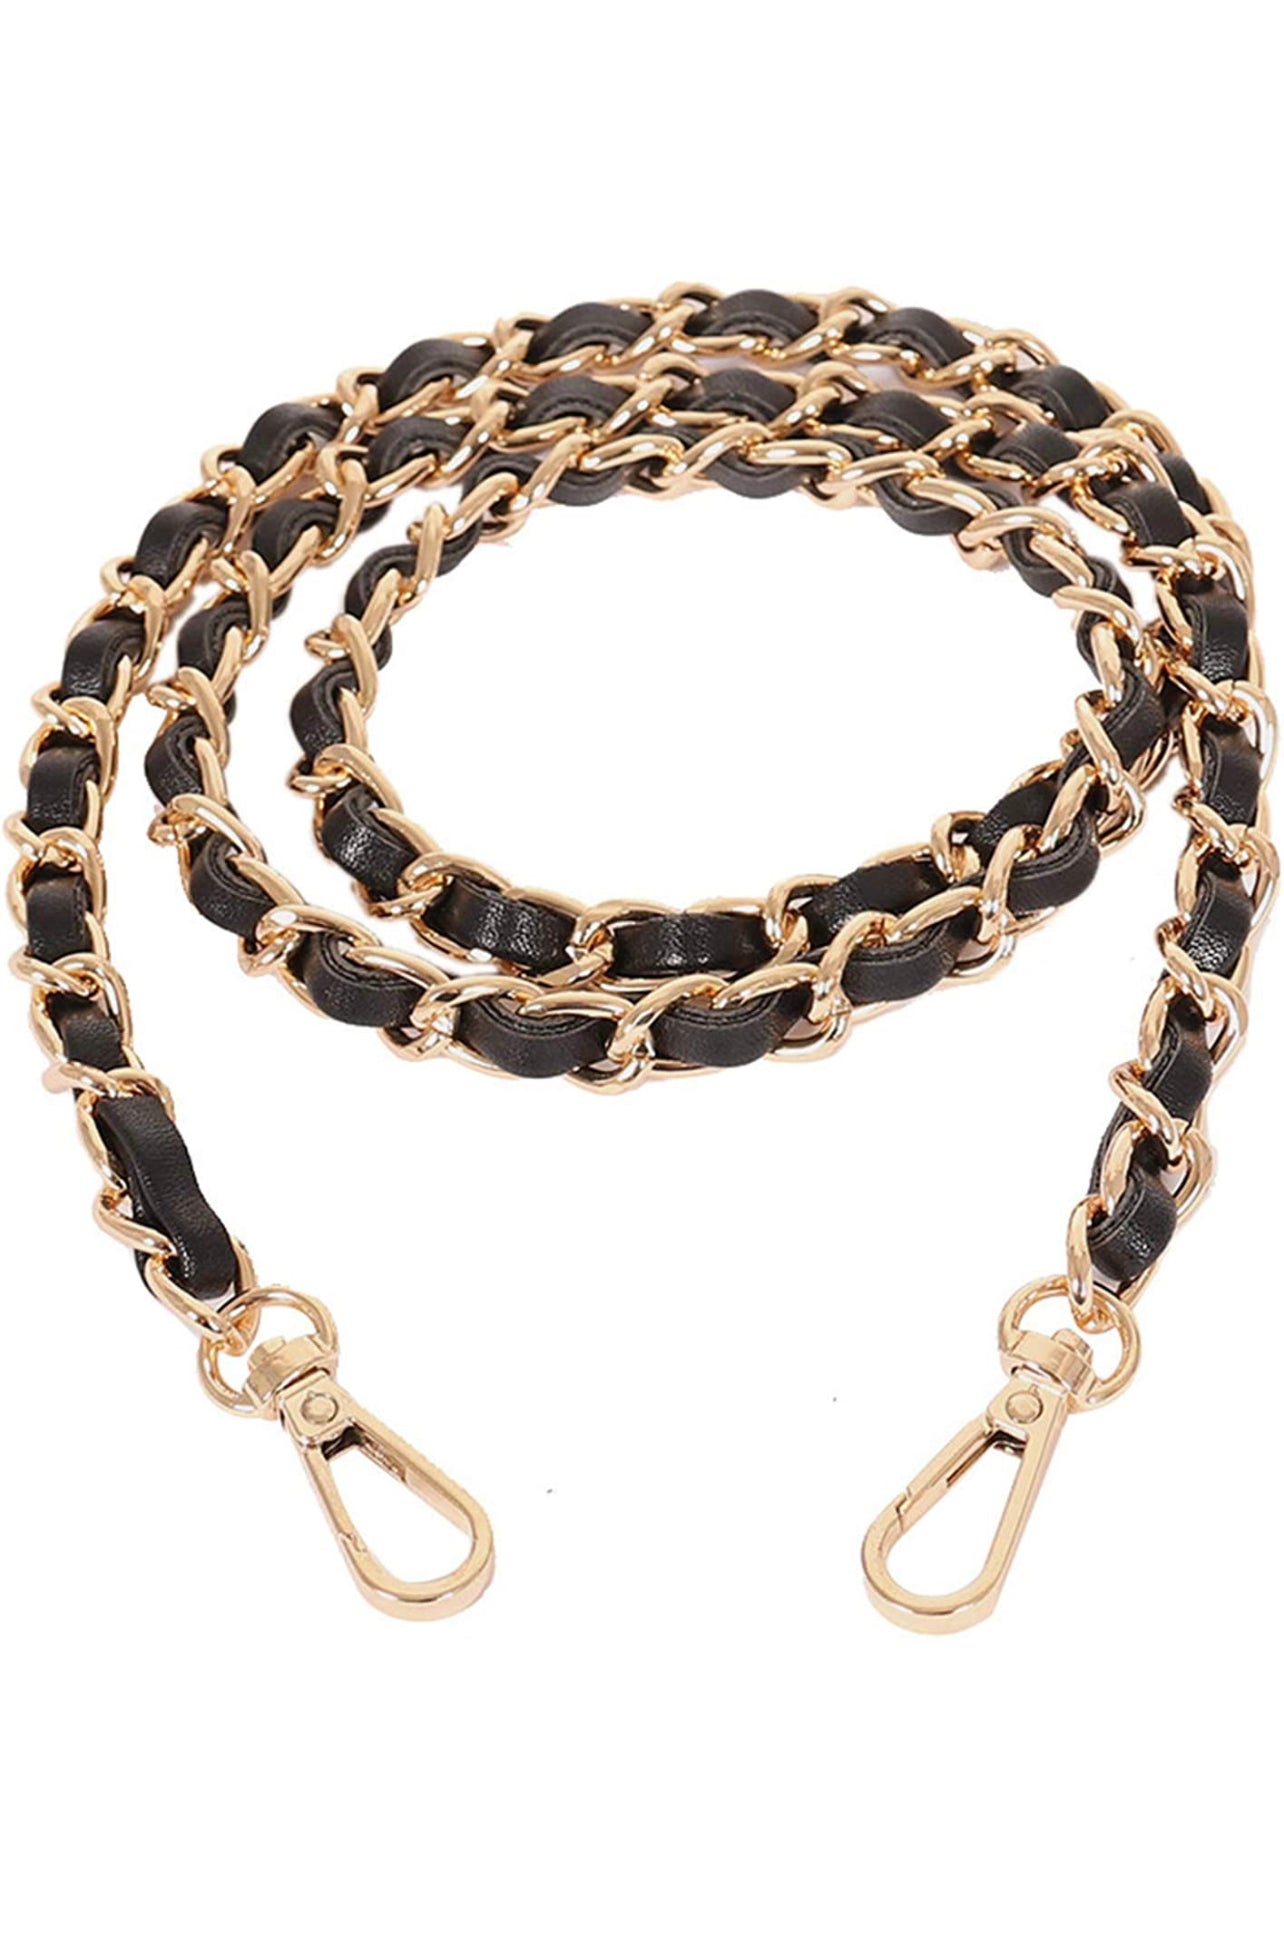 Gold Chain Woven Black Leather Strap